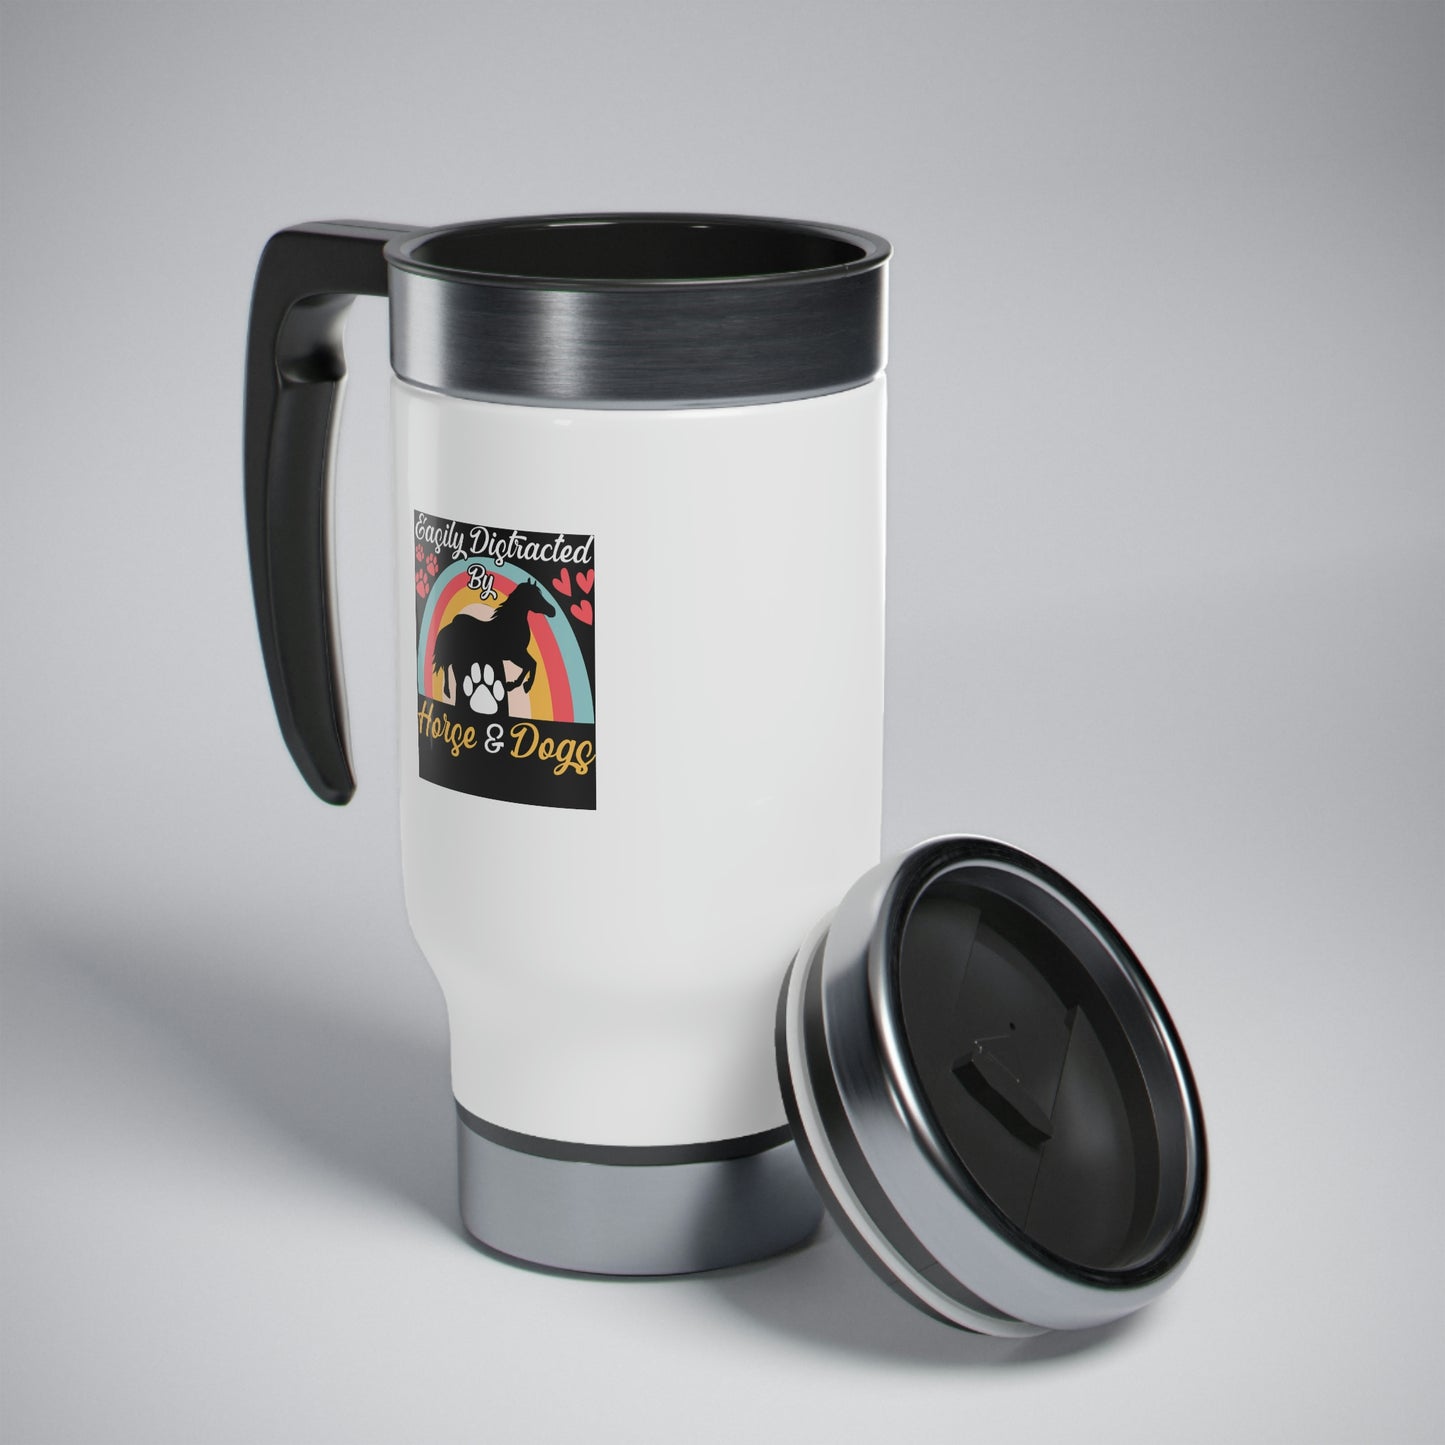 Easily Distracted by Horse and Dogs Stainless Steel Travel Mug with Handle, 14oz